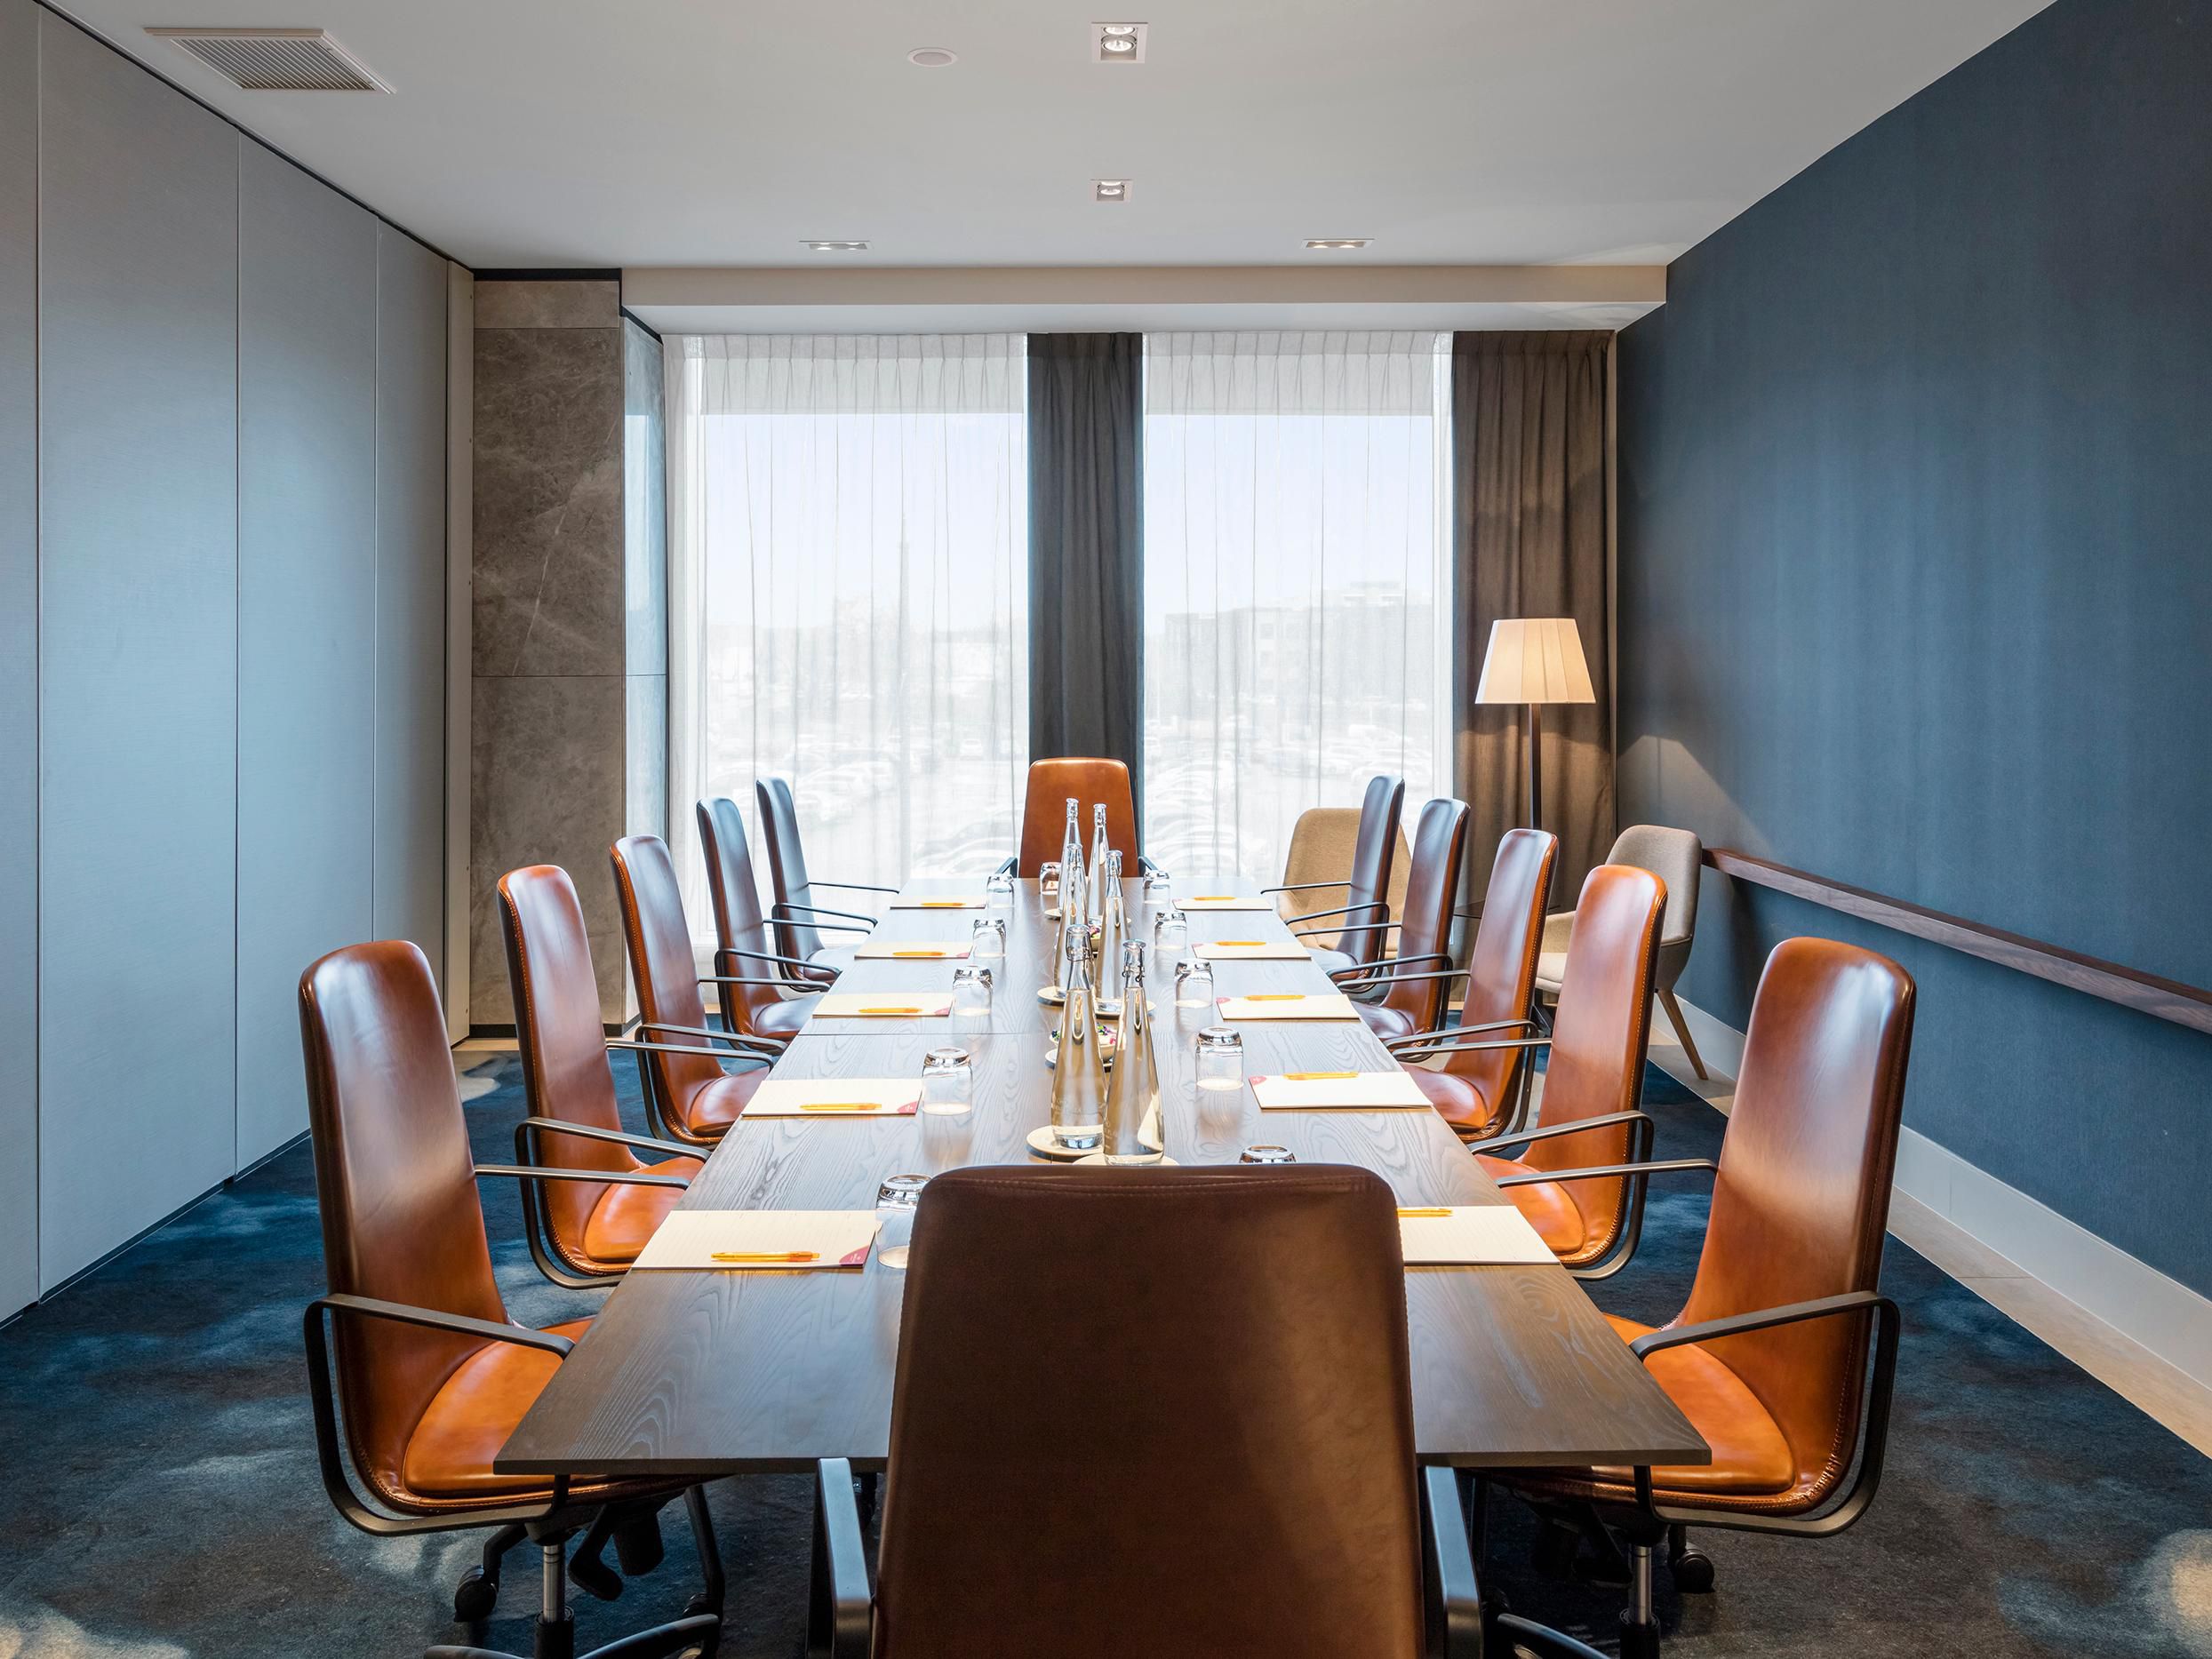 With our range of modern meetings and events spaces, delicious catering and bustling CBD location, we have the perfect meeting and conference venue for you and your delegates. Whether you’re looking for a small meeting venue or a large conference space, we have what you need for your event. 